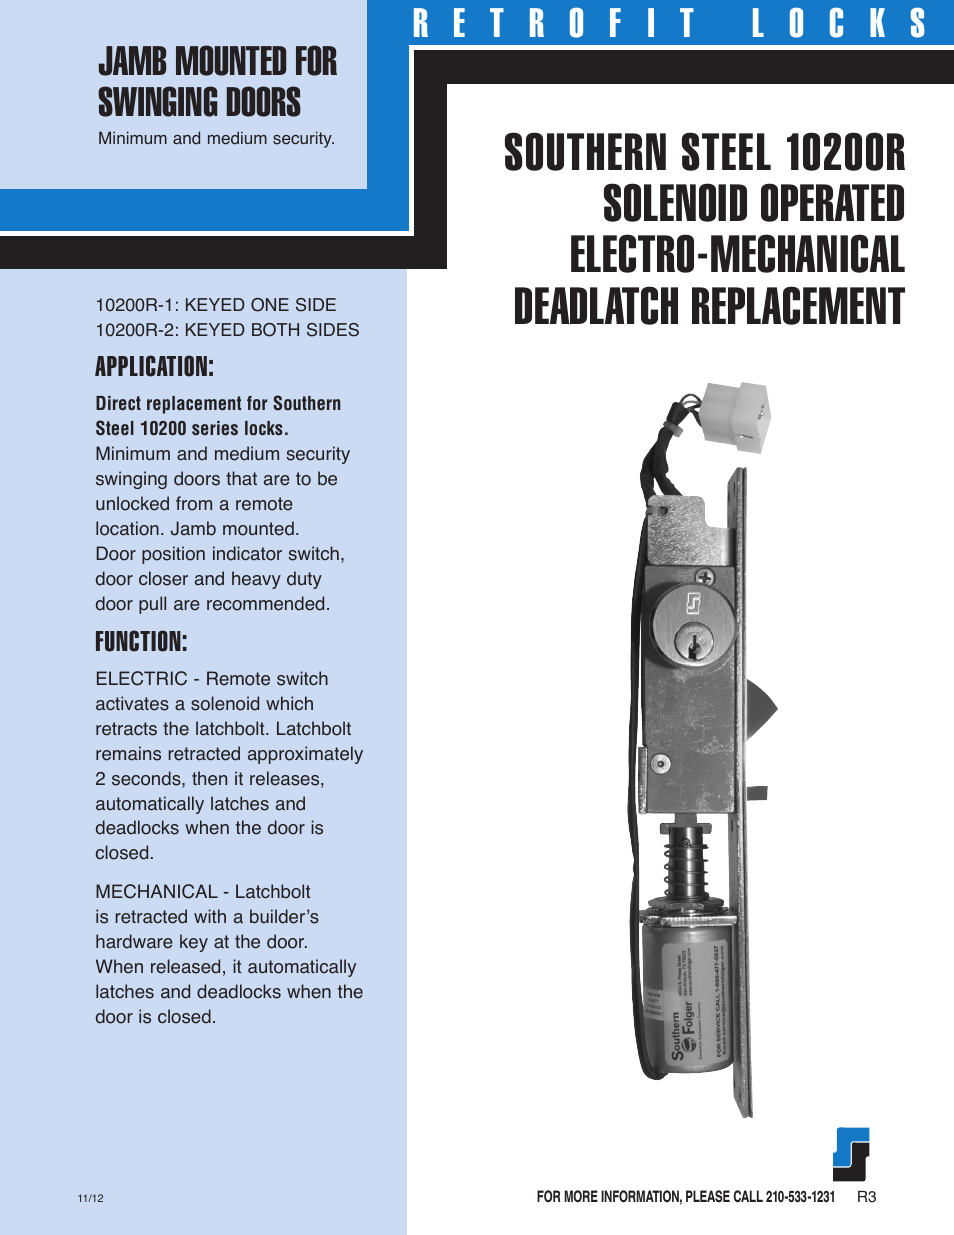 10200R SOUTHERN STEEL SOLENOID OPERATED DEADLATCH REPLACEMENT